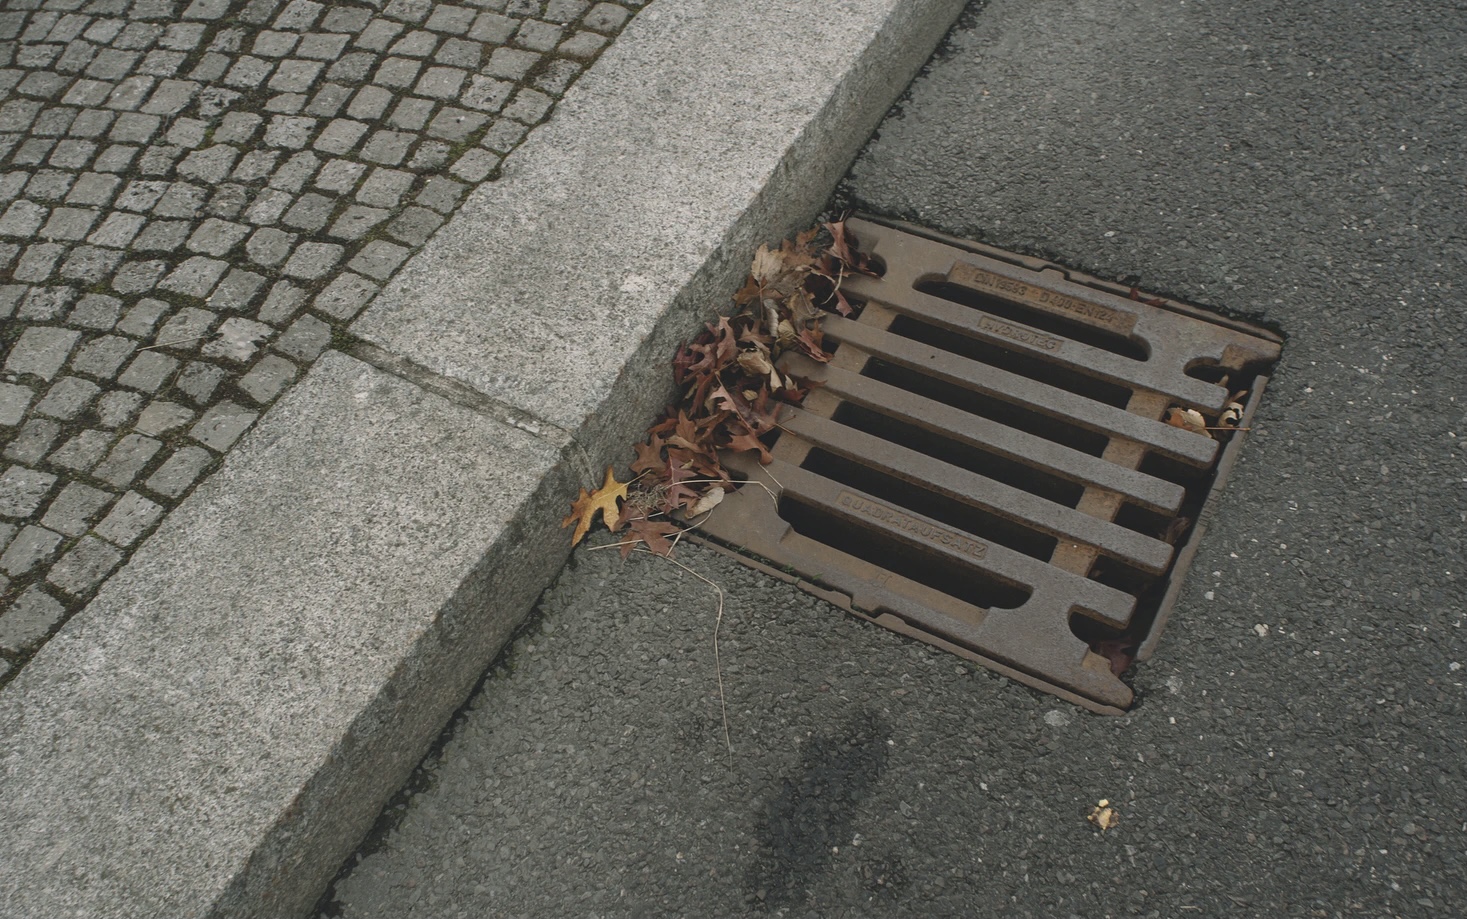 NEWS | Something odd is happening to drain covers in one Herefordshire village